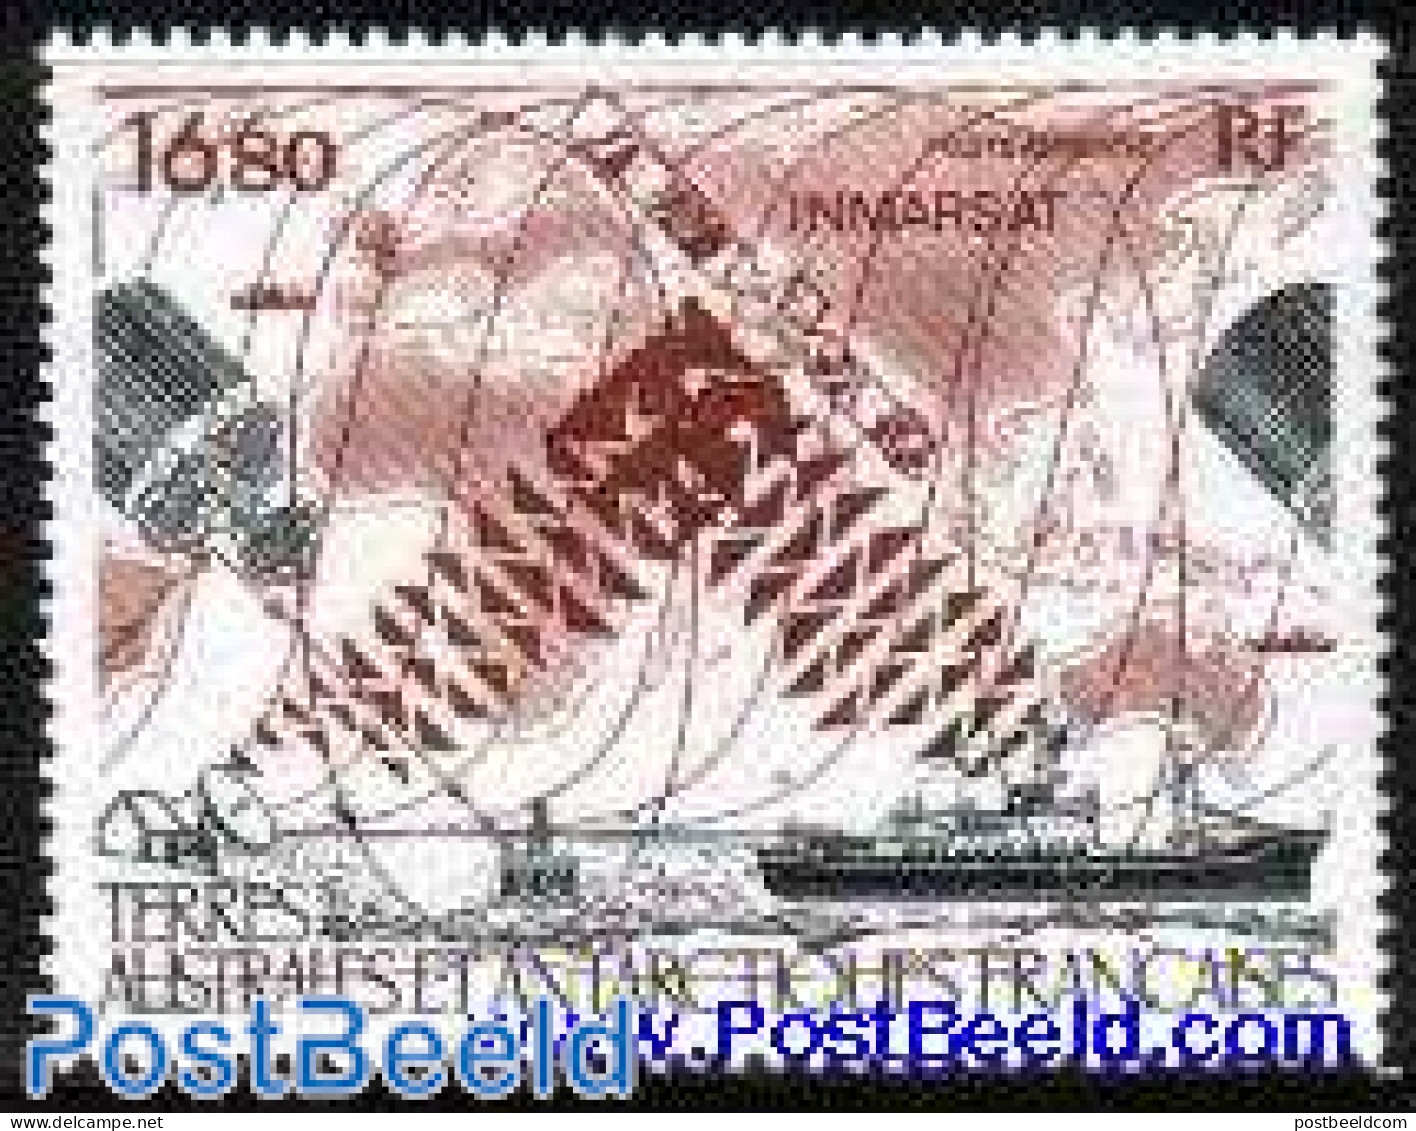 French Antarctic Territory 1987 Inmarsat 1v, Mint NH, Science - Transport - Telecommunication - Ships And Boats - Spac.. - Neufs